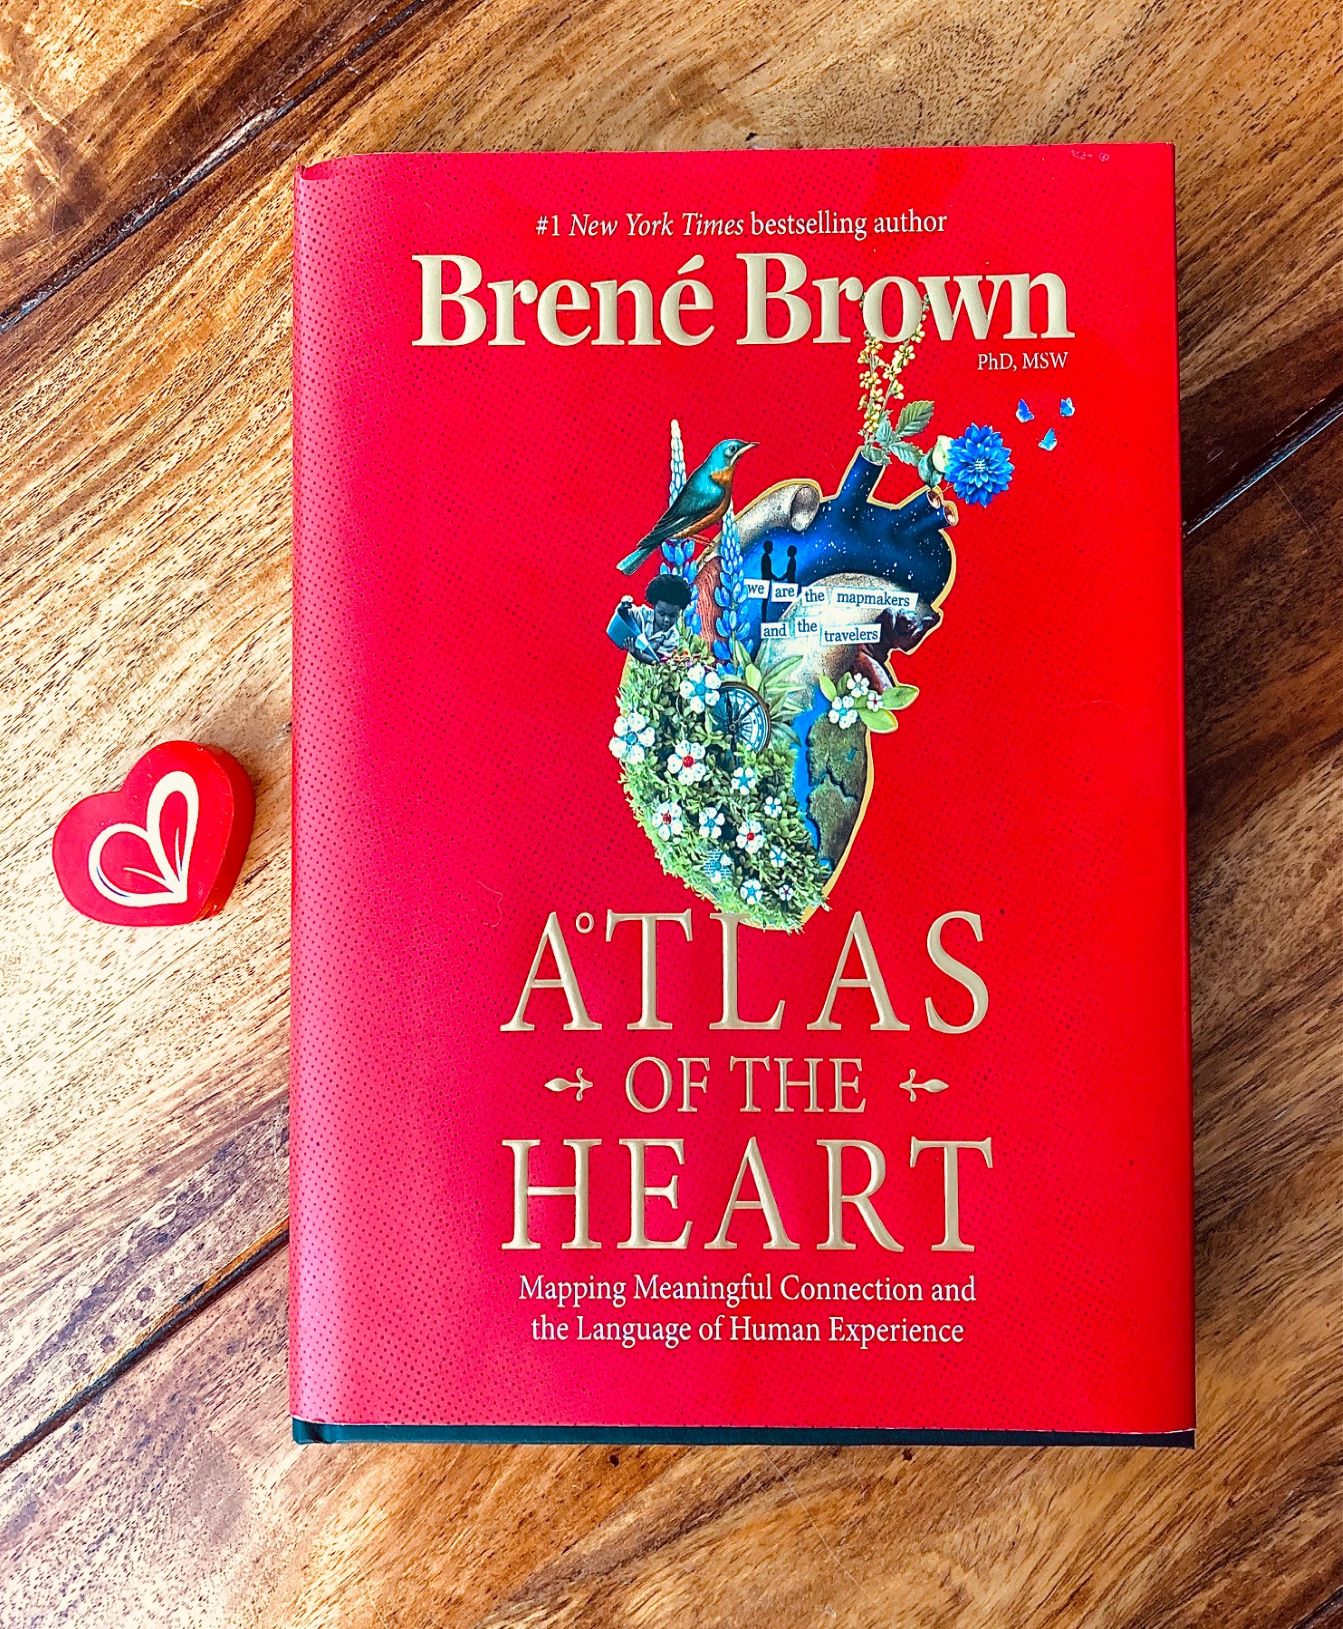 Atlas of the Heart by Brene Brown book pictured next to a red wooden heart